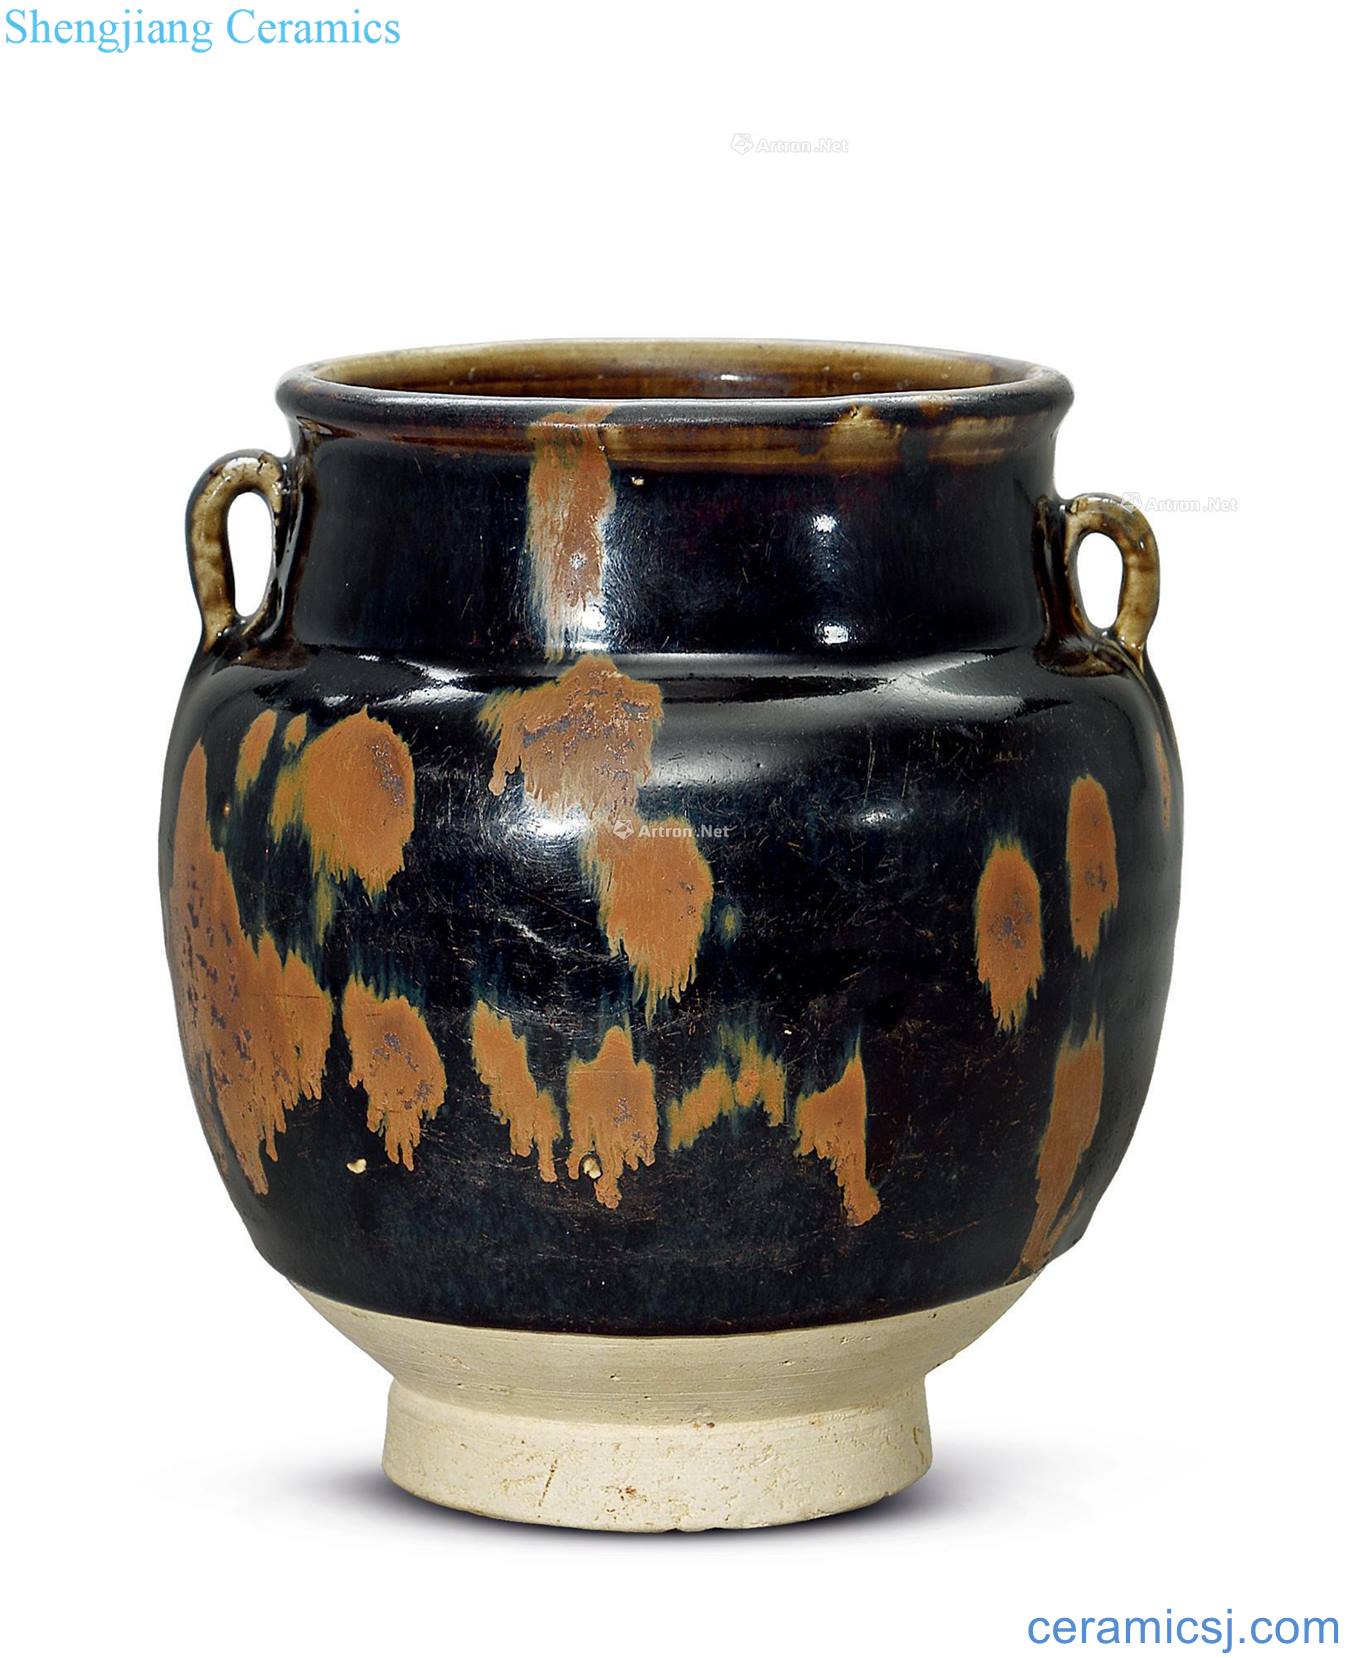 Northern song dynasty/gold The black glaze iron rust stain ears cans